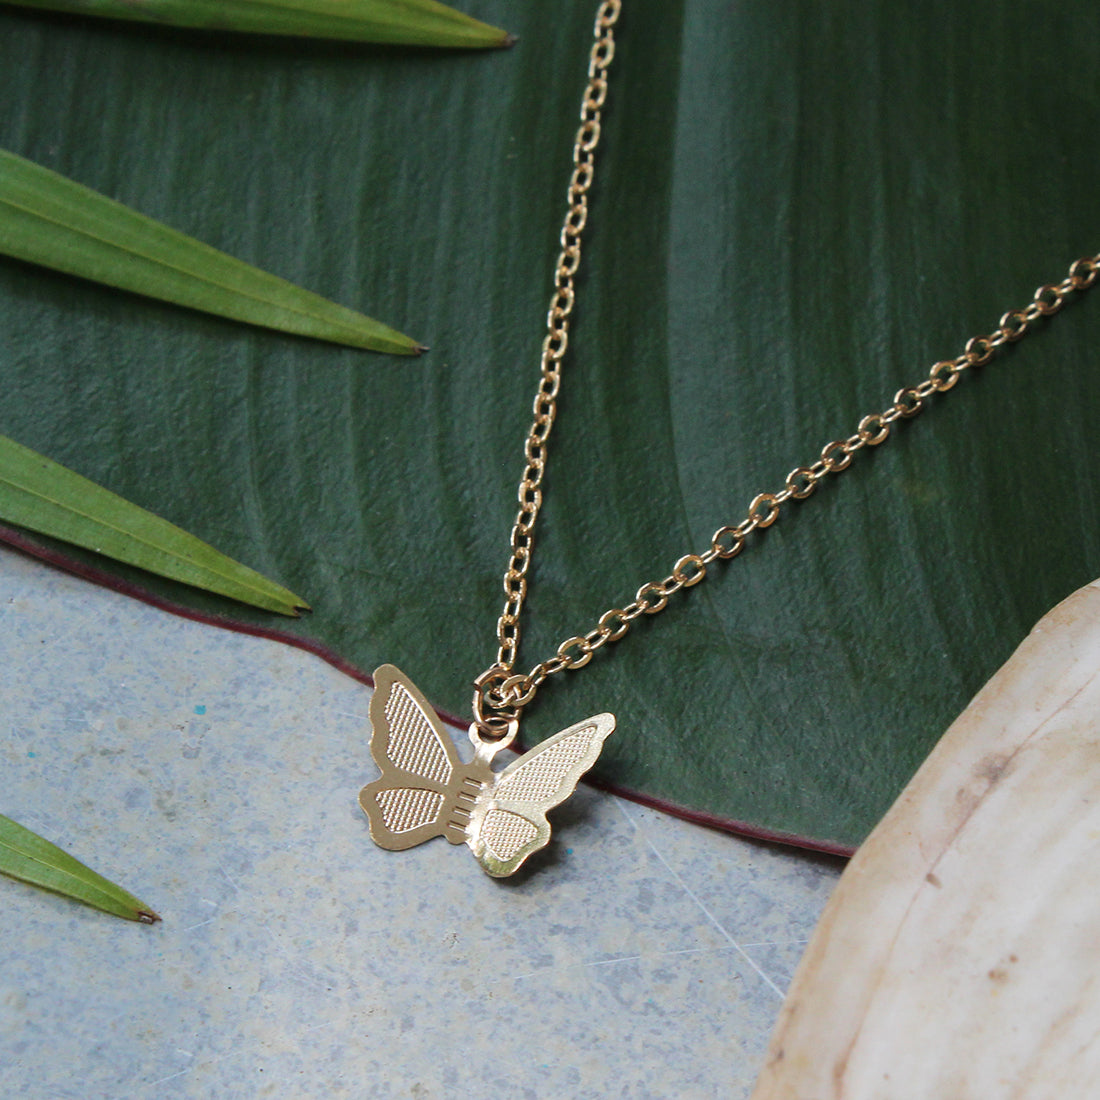 MINI BUTTERFLY PENDANT GOLD-TONED DAINTY NECKLACE